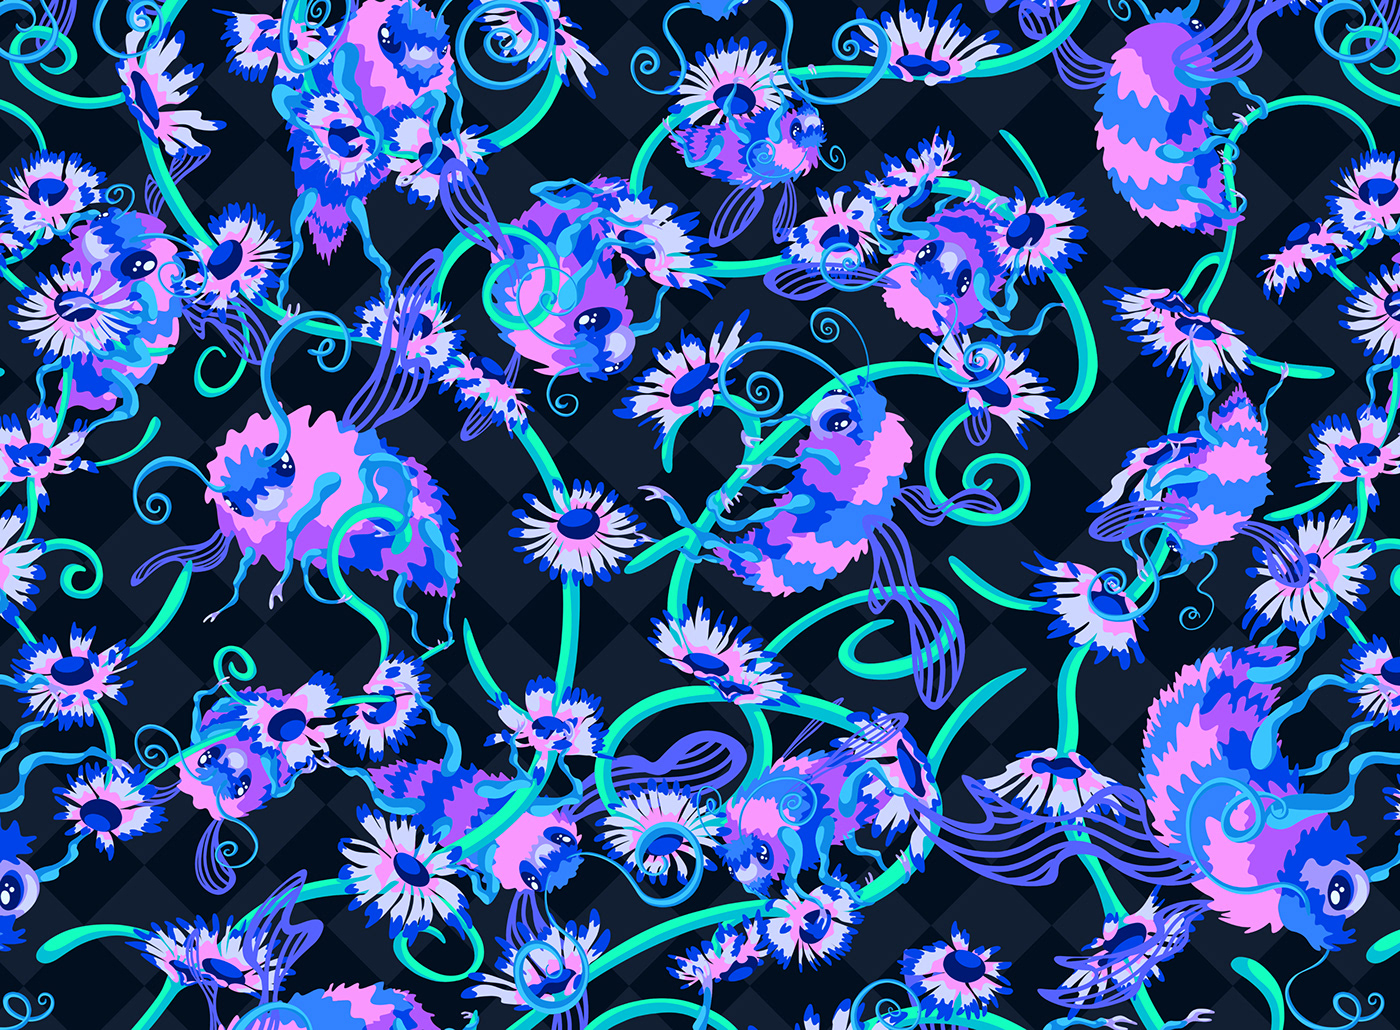 Cute illustrated neon pink and blue bumble bees.